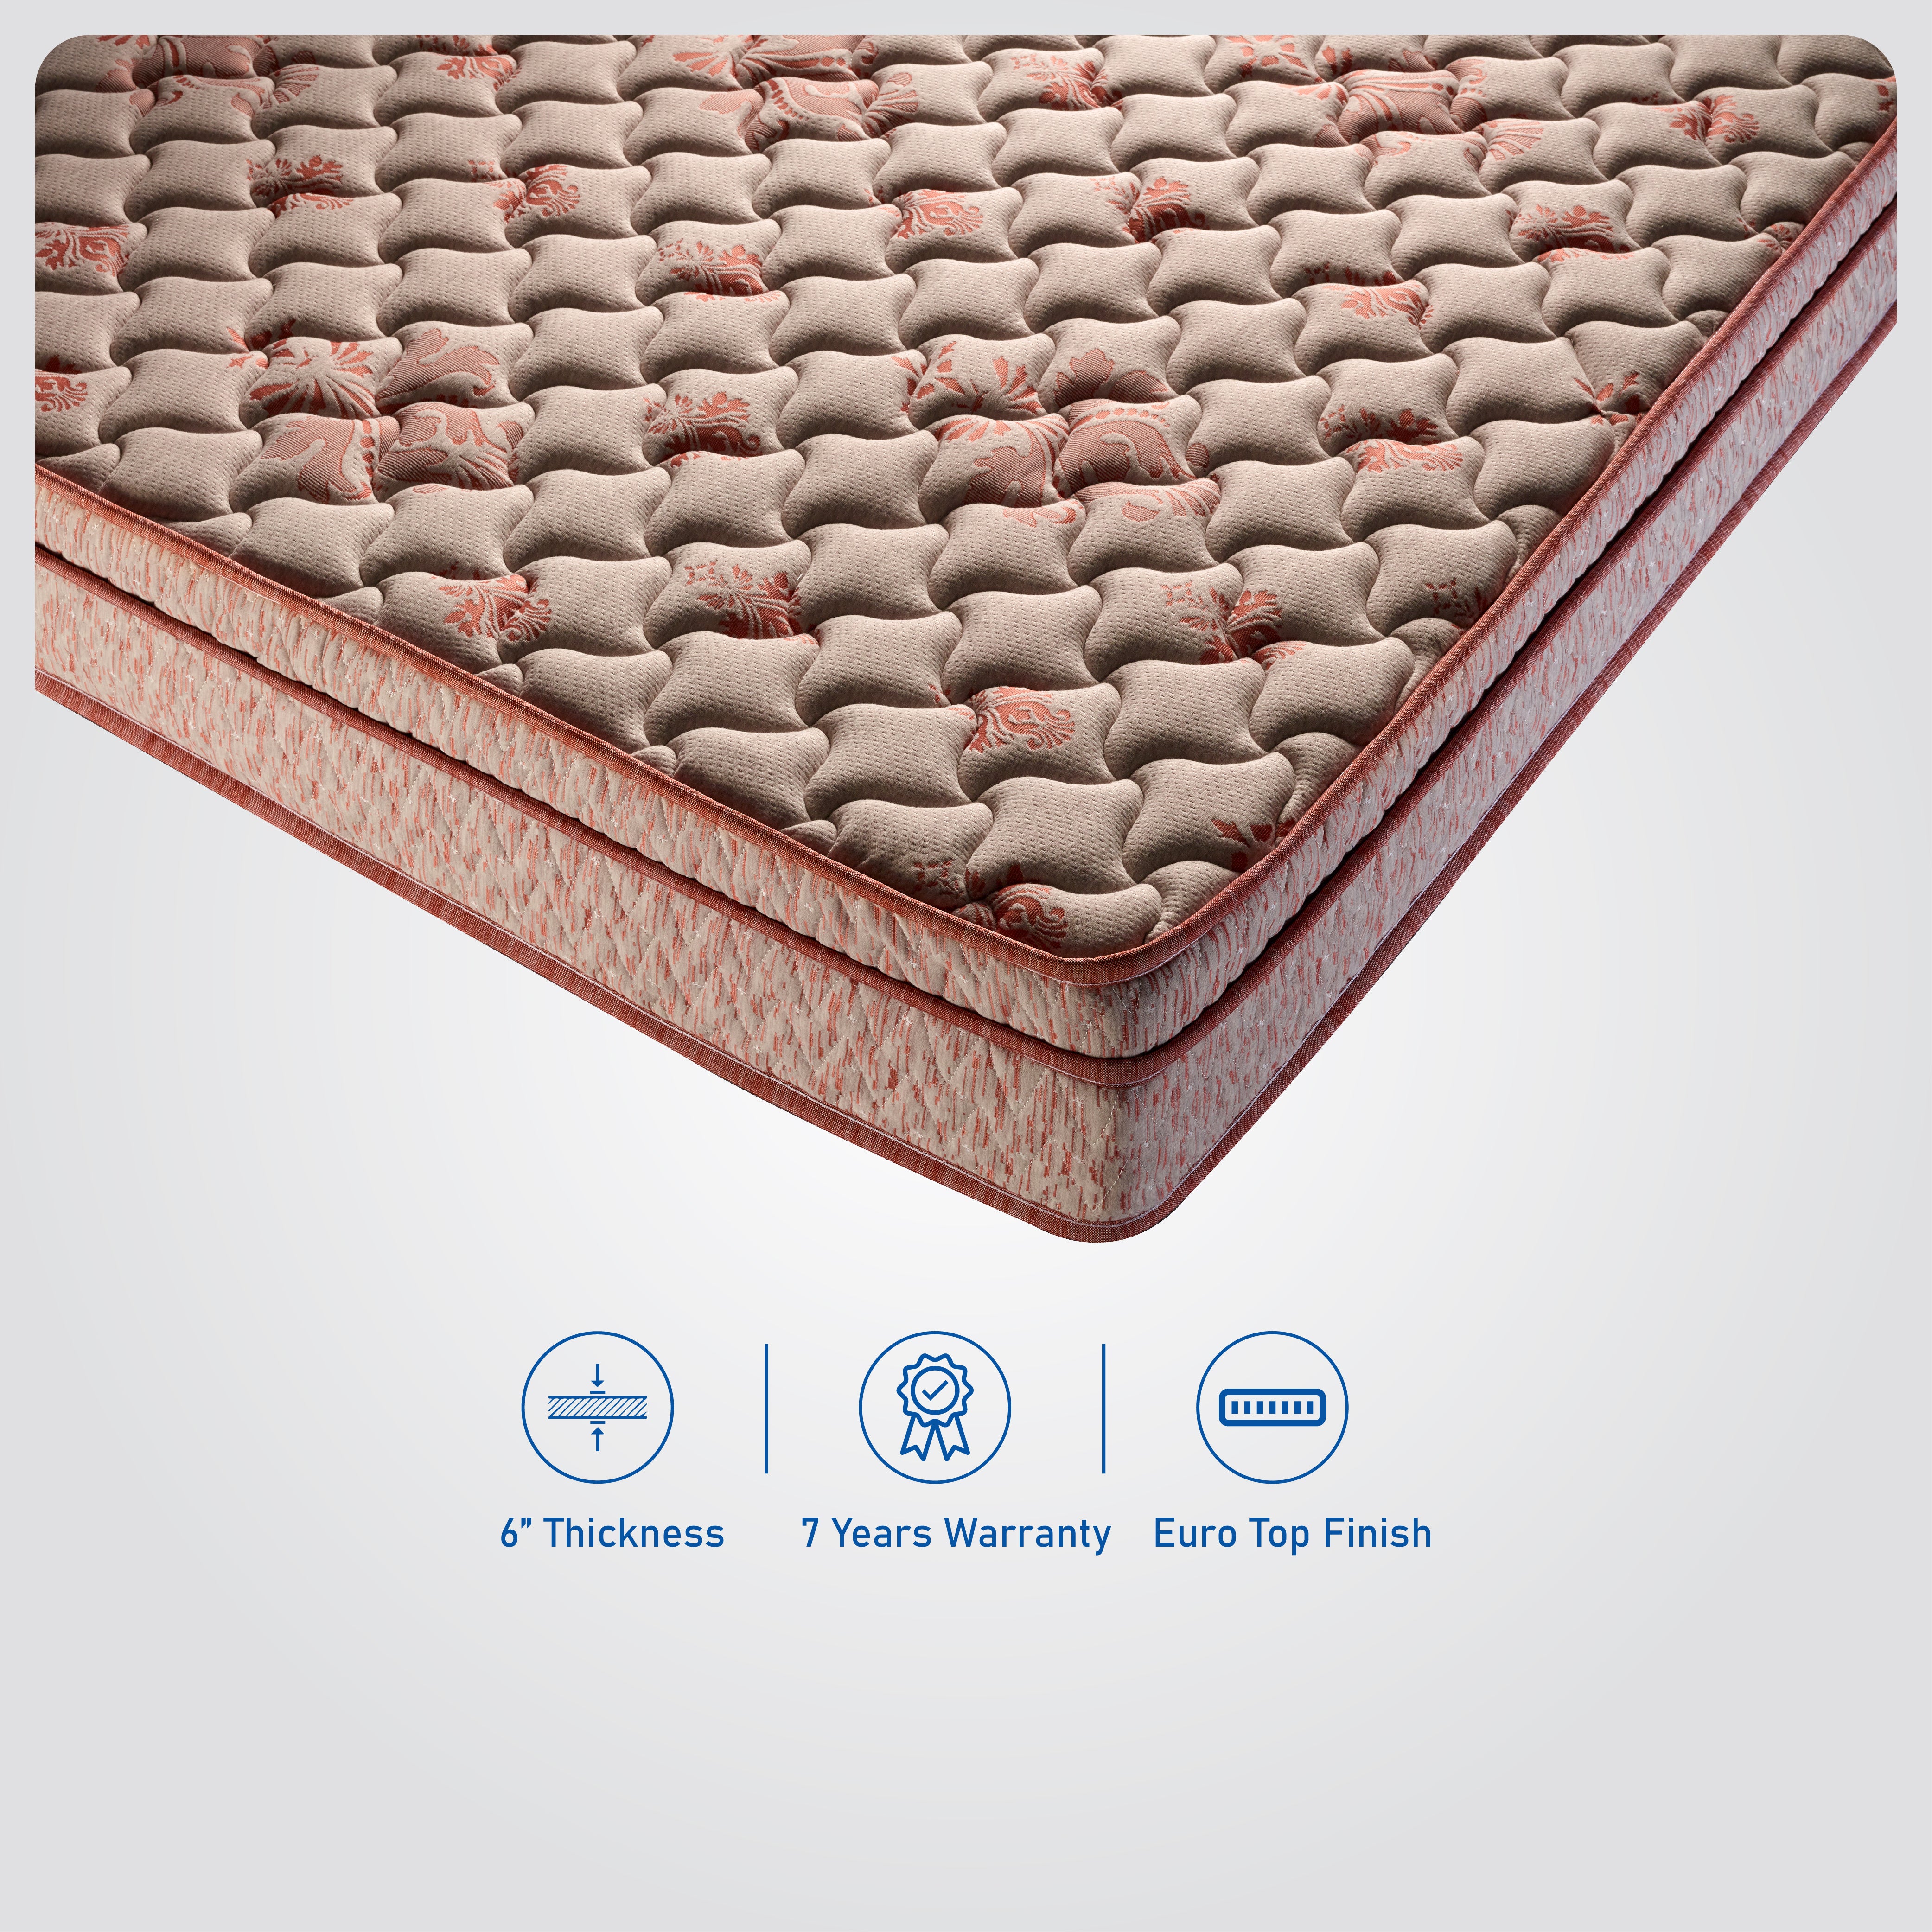 Best Orthopedic Back Support Sandwiched Coir Mattress In India